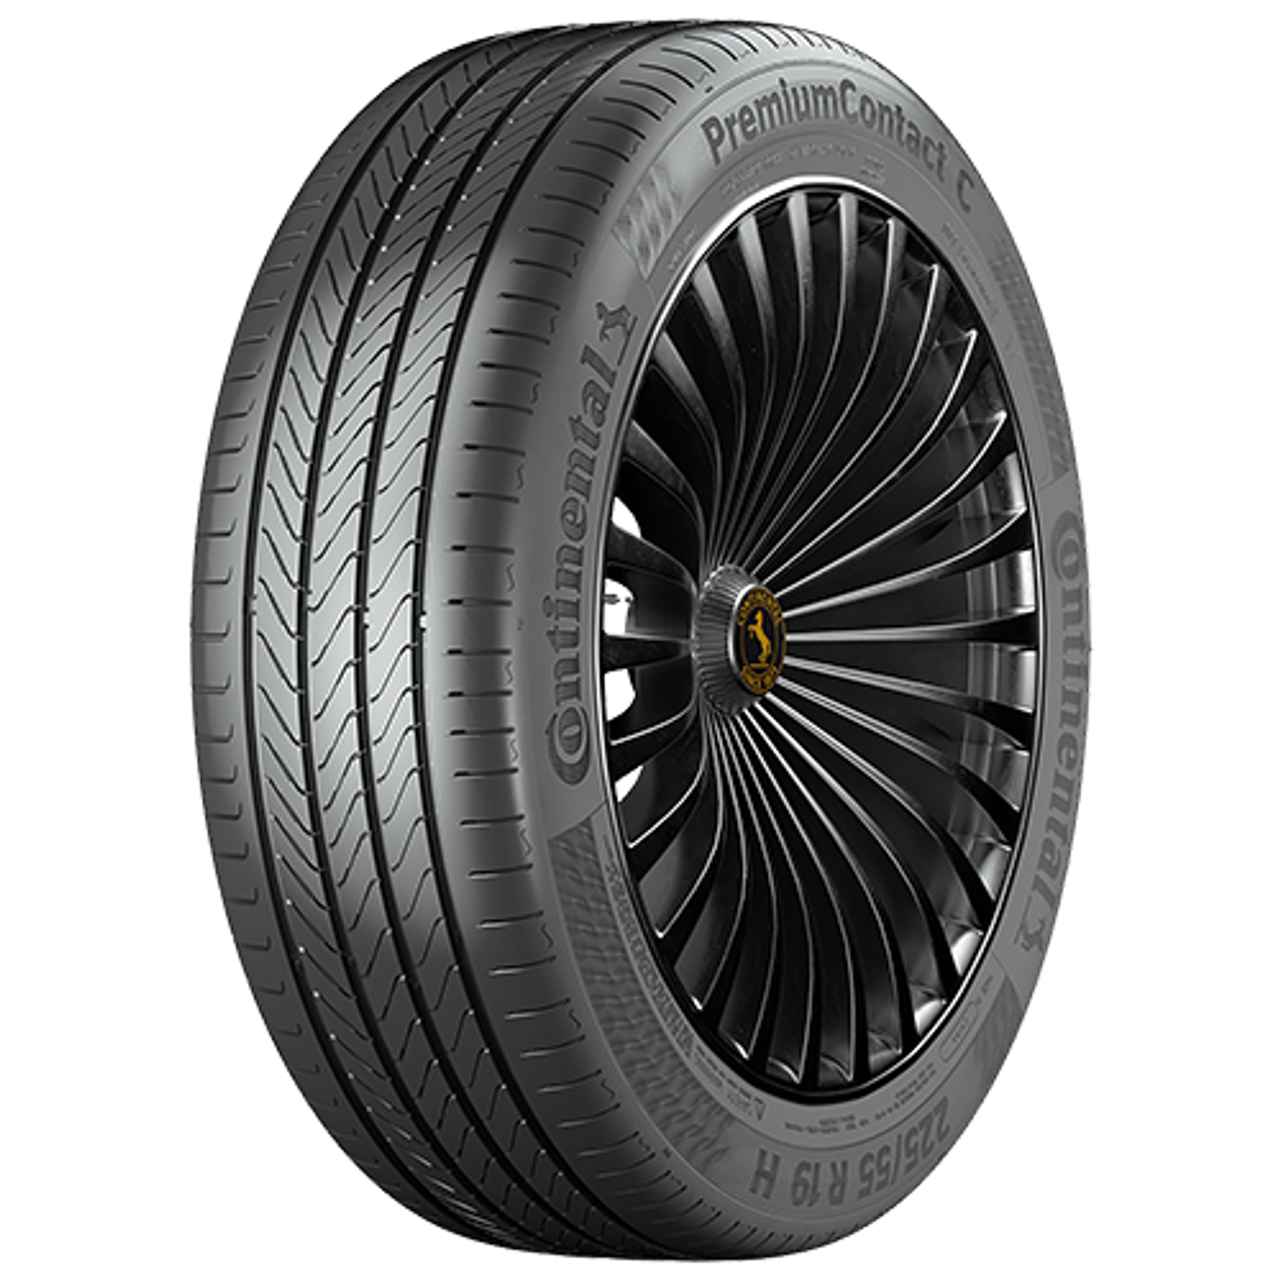 CONTINENTAL PREMIUMCONTACT C (EVc) 255/45R20 105V CONTISILENT FR BSW von Continental